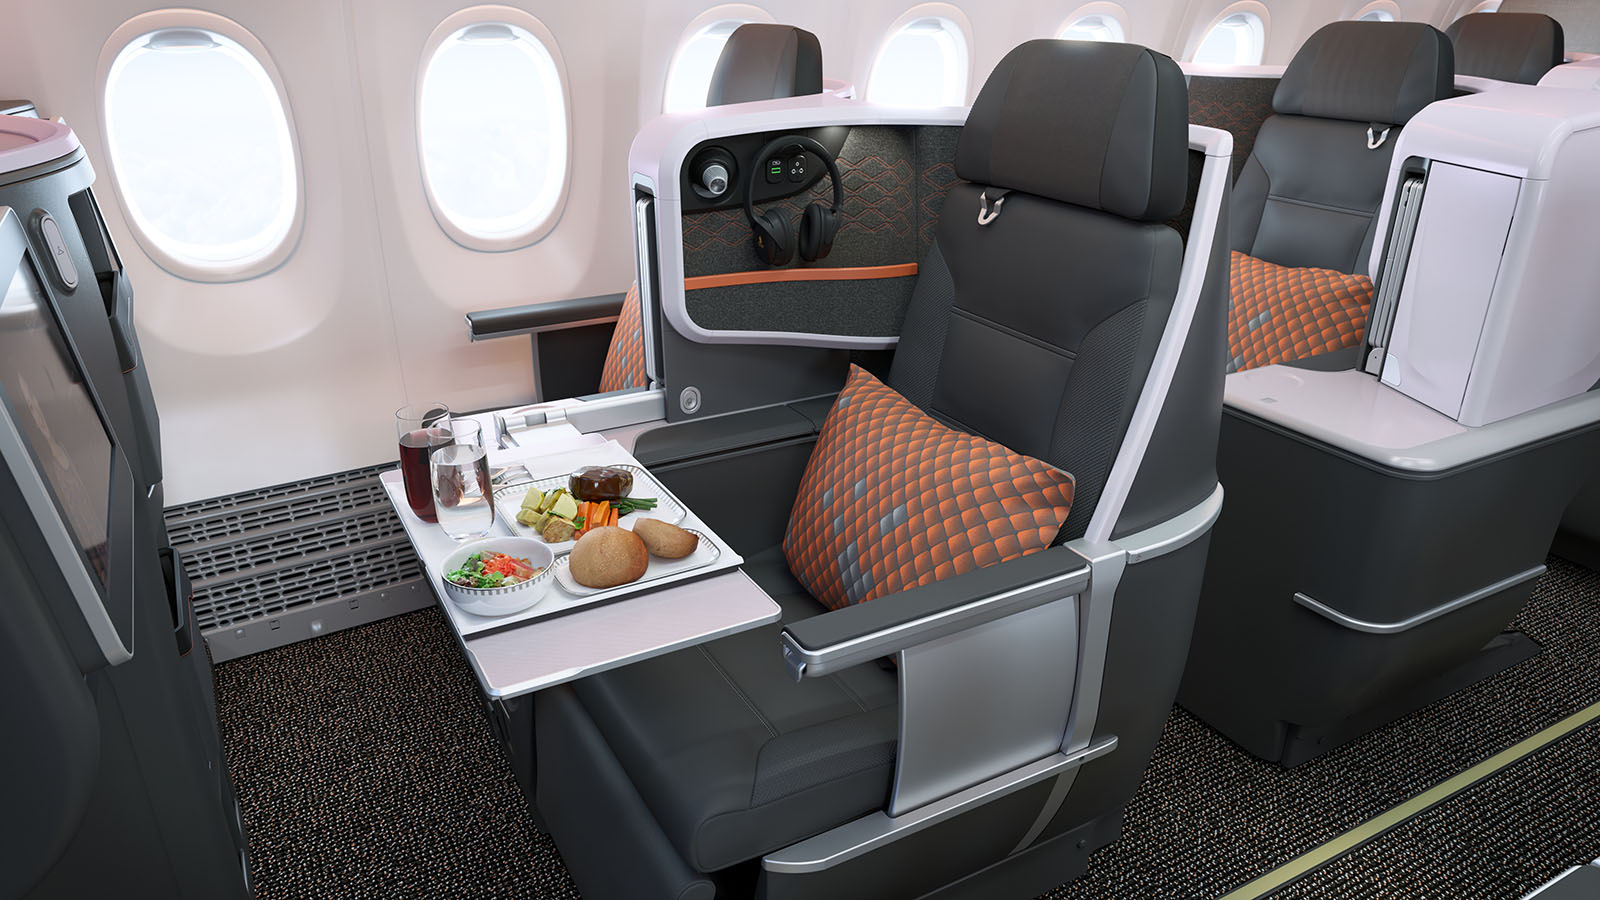 Singapore Airlines' Boeing 737-8 Business Class